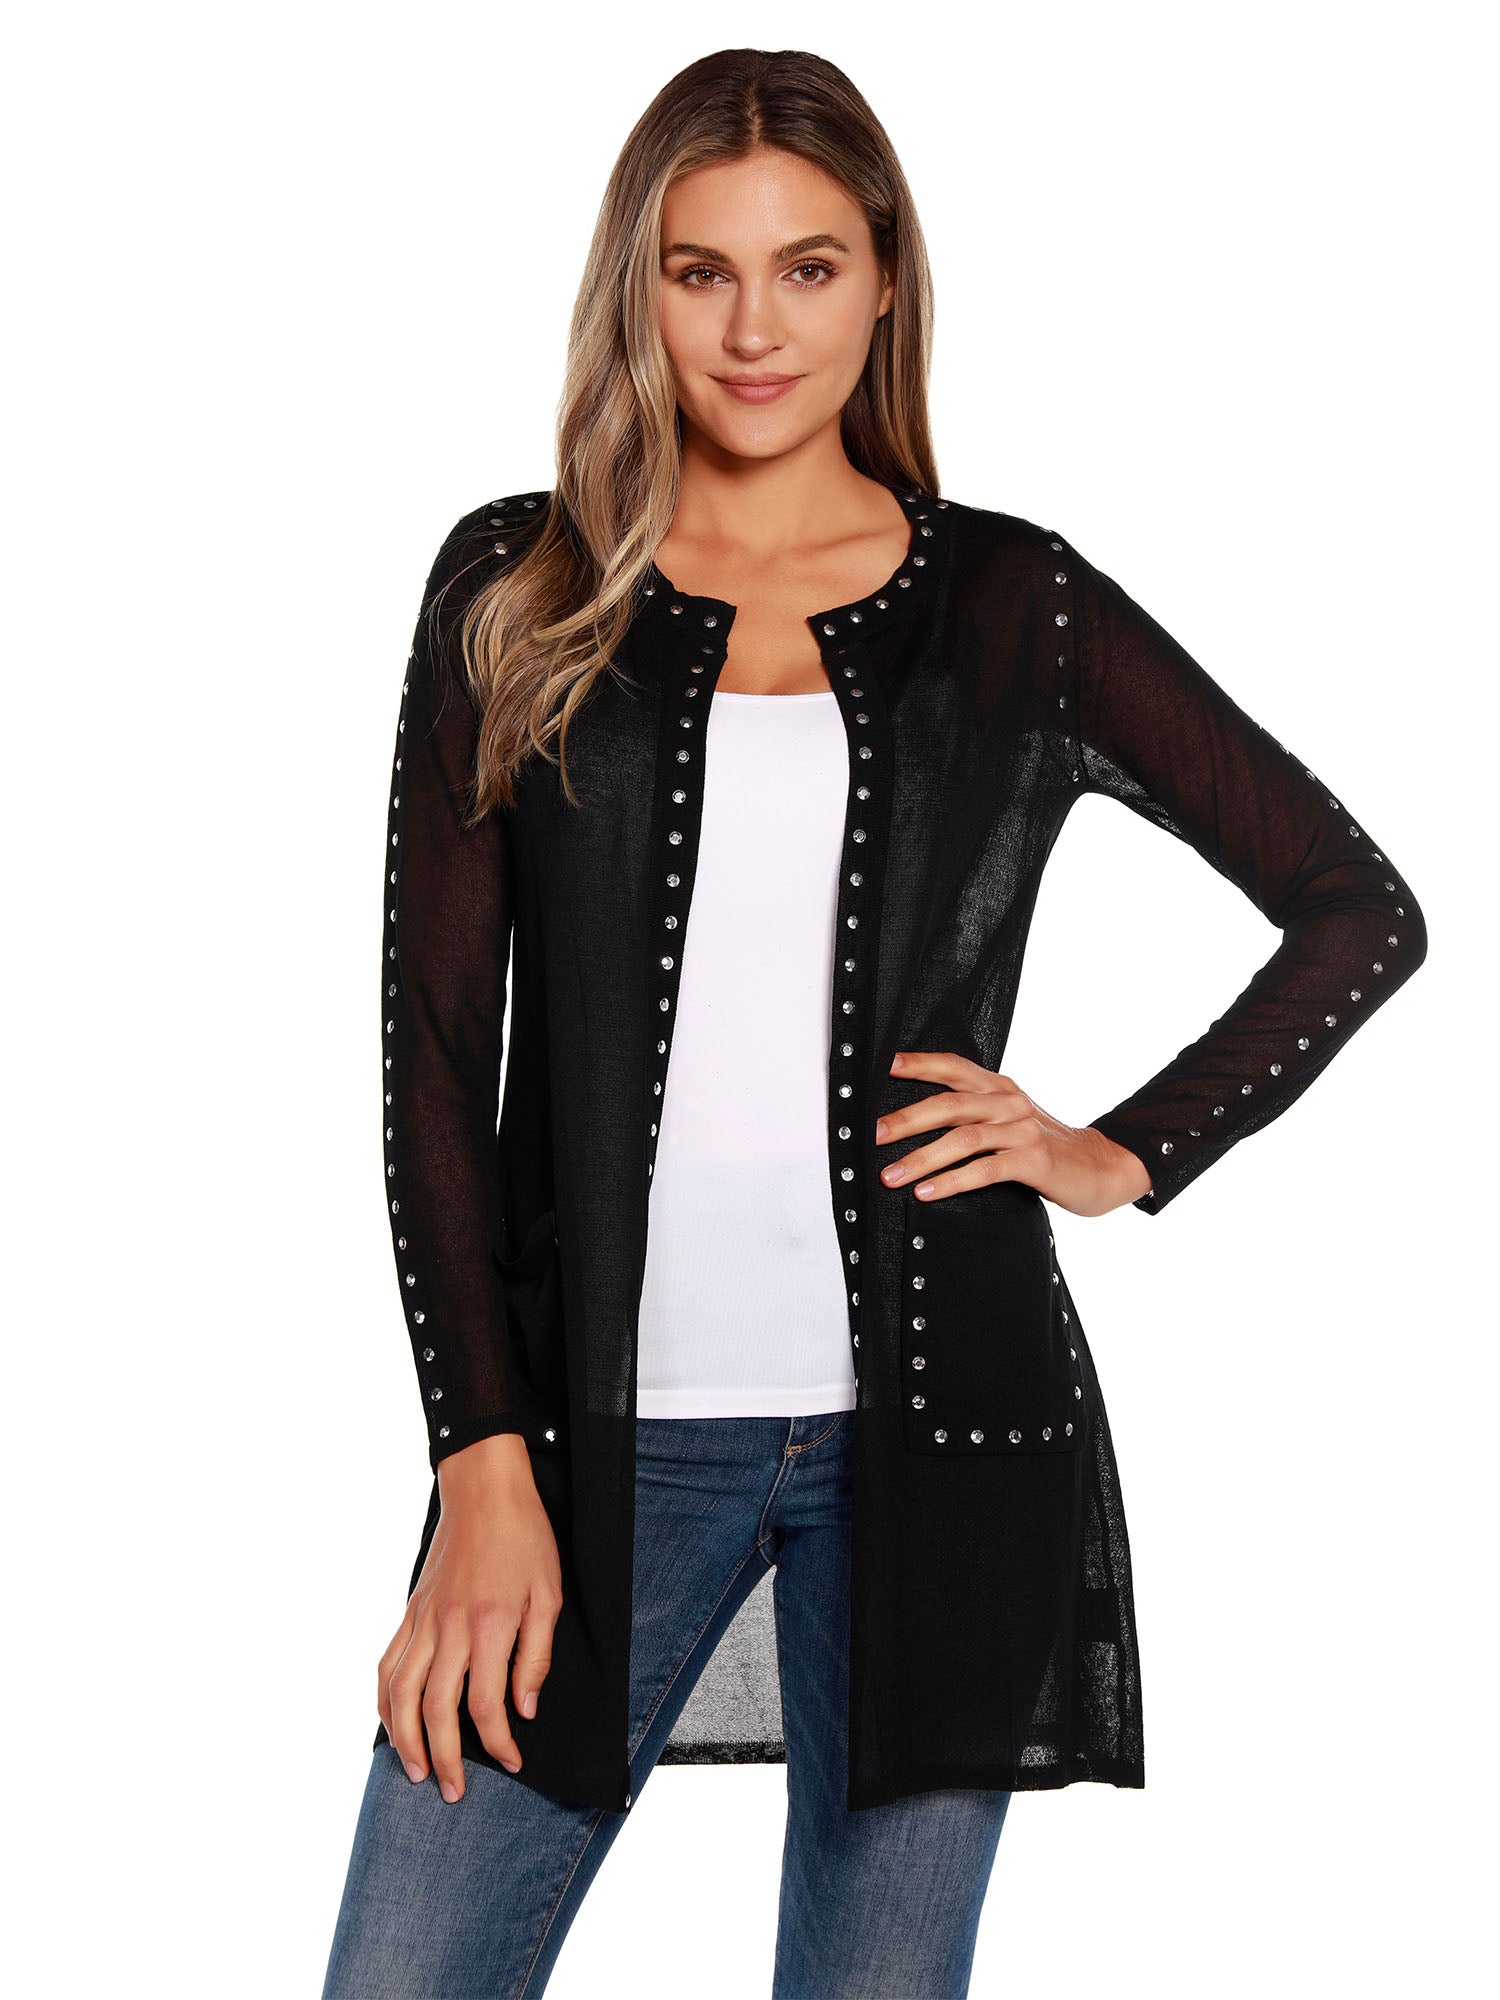 Women's Long Sleeve Sheer Cardigan with Rhinestud Trim and Pockets